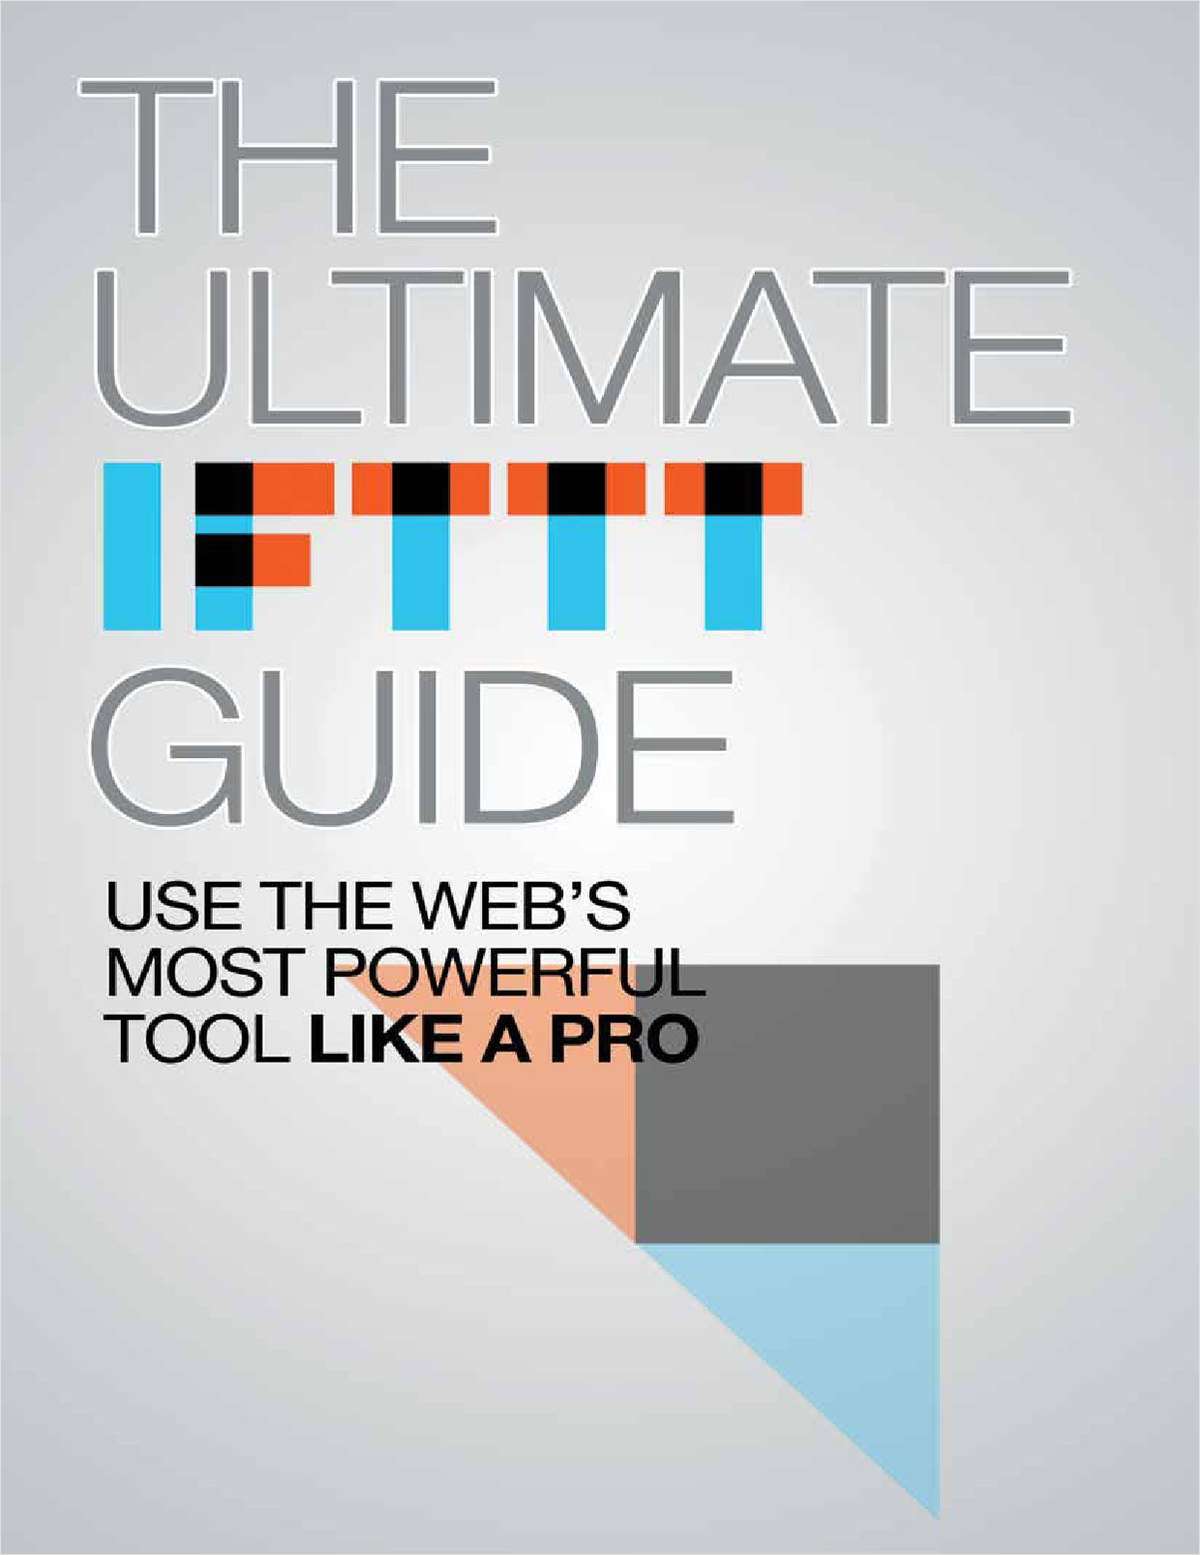 Ultimate IFTTT Guide Use the Web's Most Powerful Tool Like A Pro